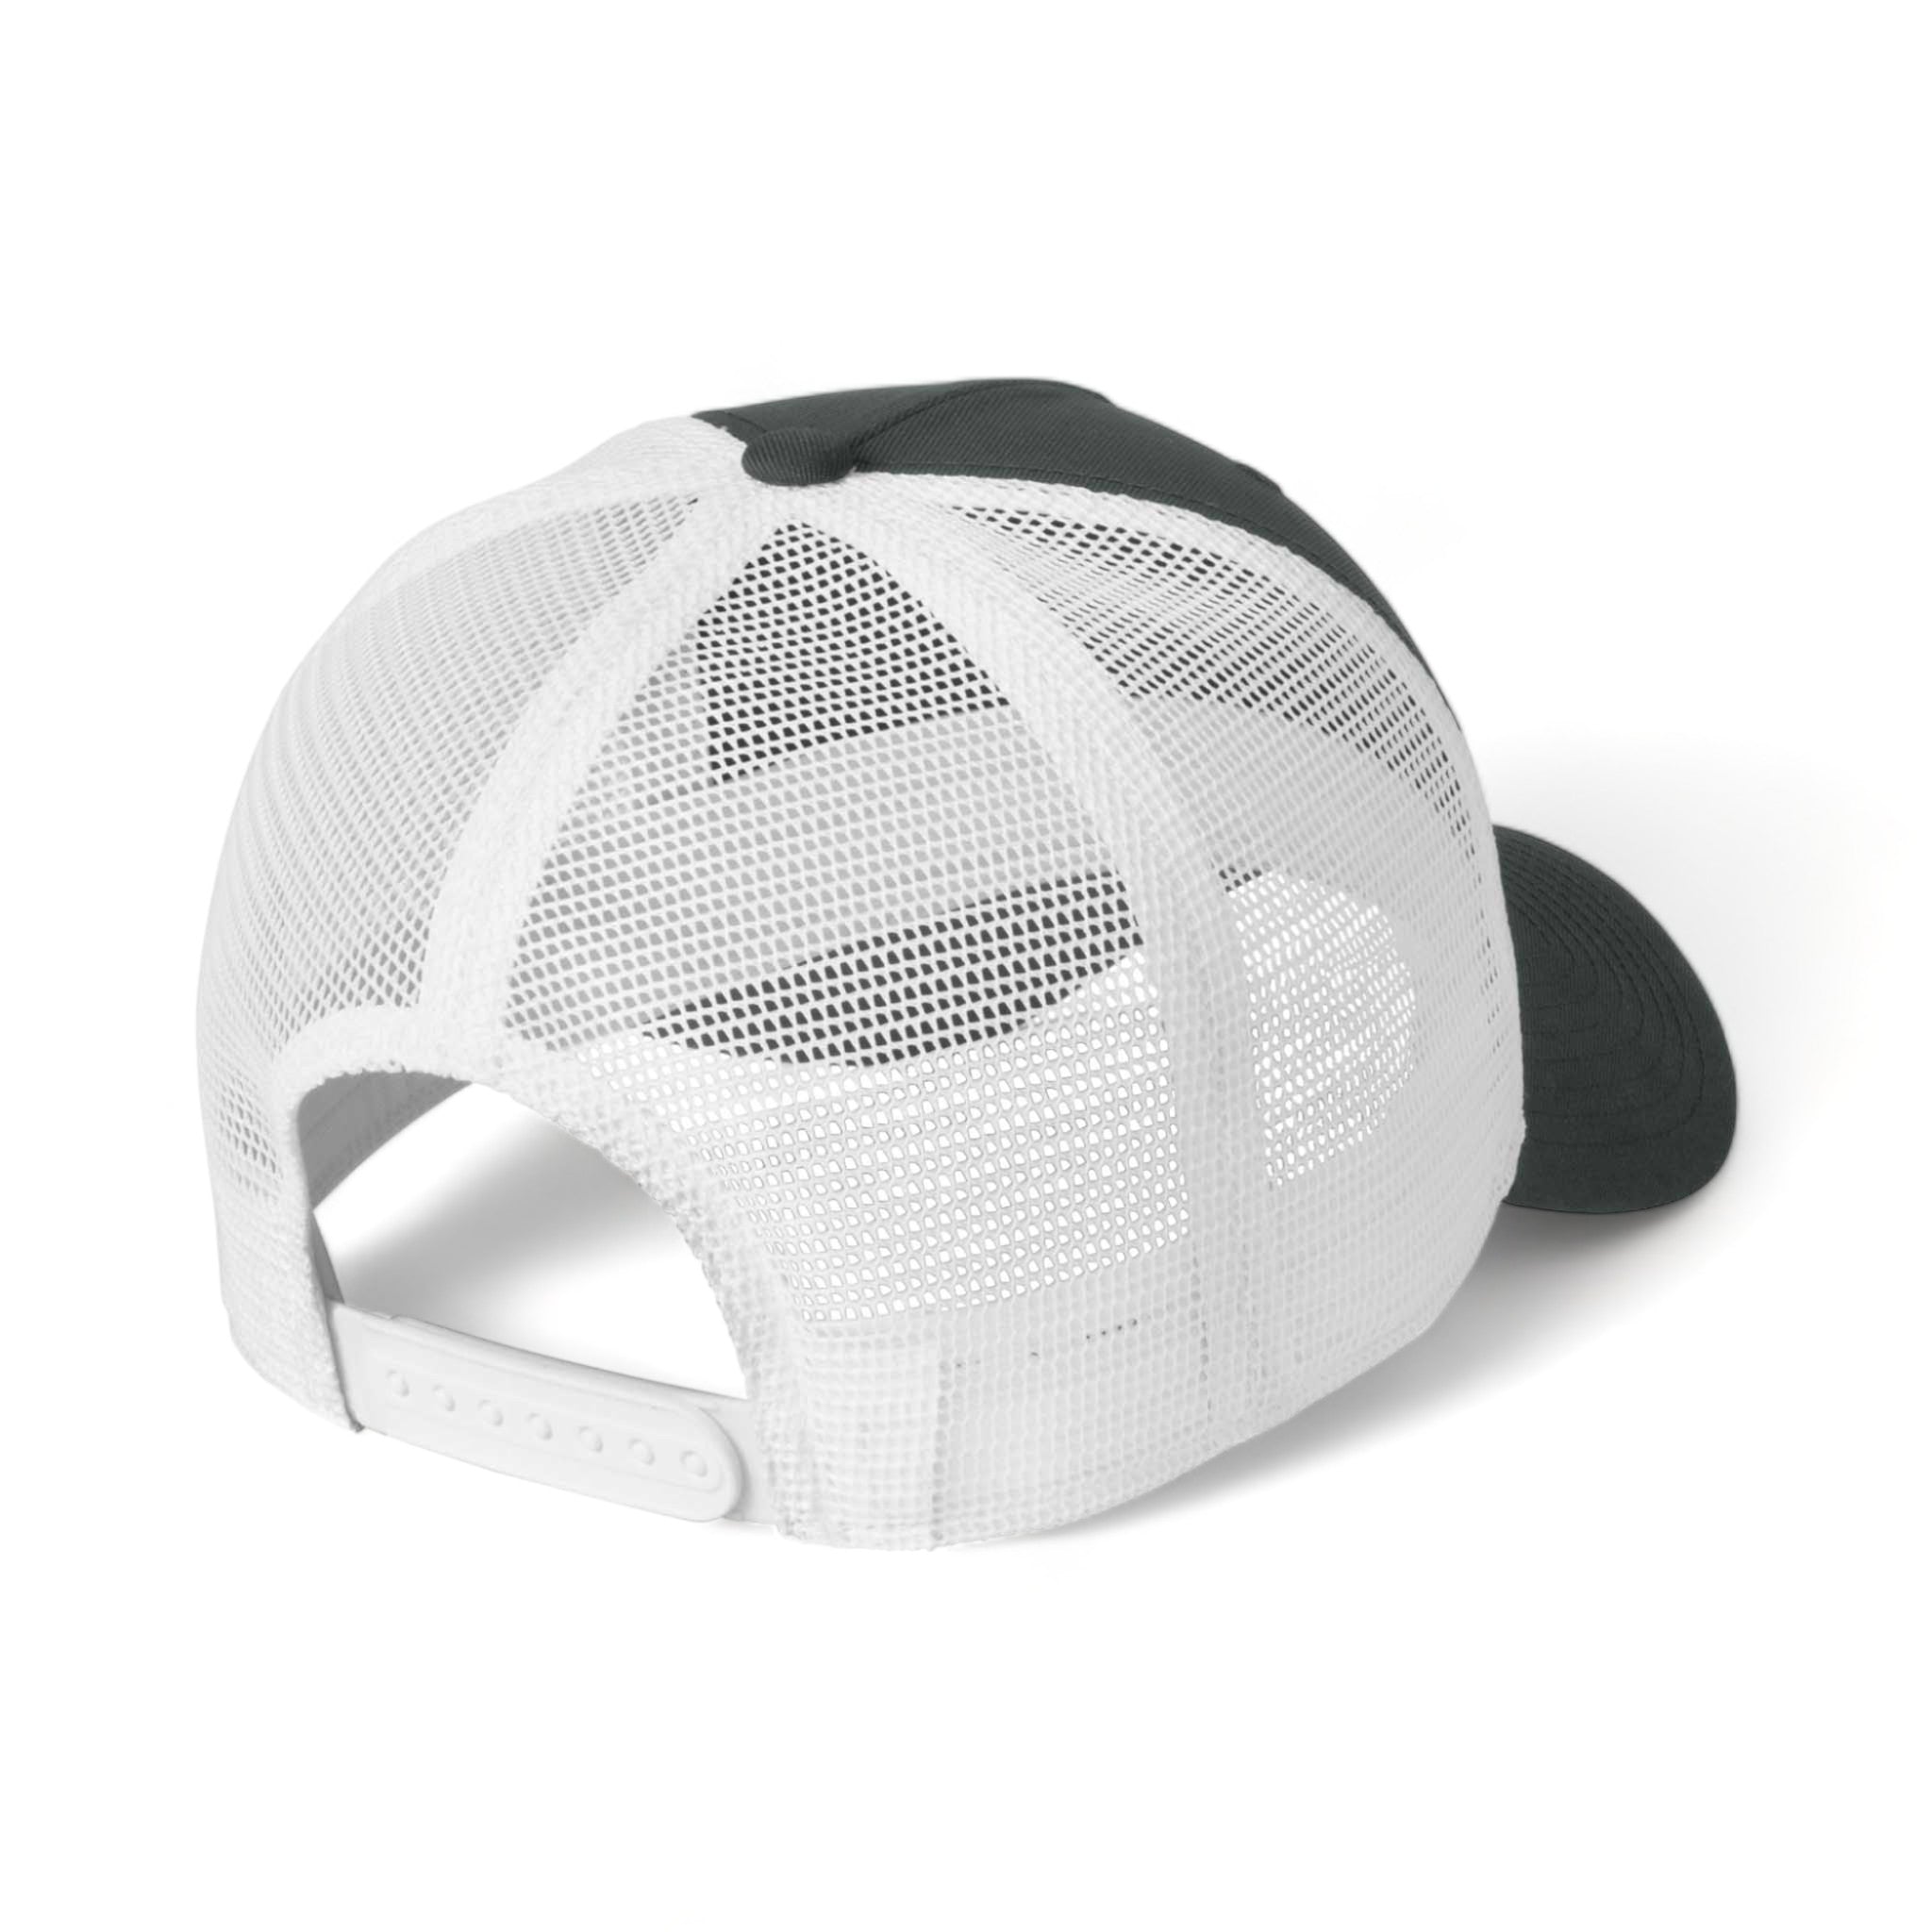 Back view of Nike NKFN9893 custom hat in anthracite and white